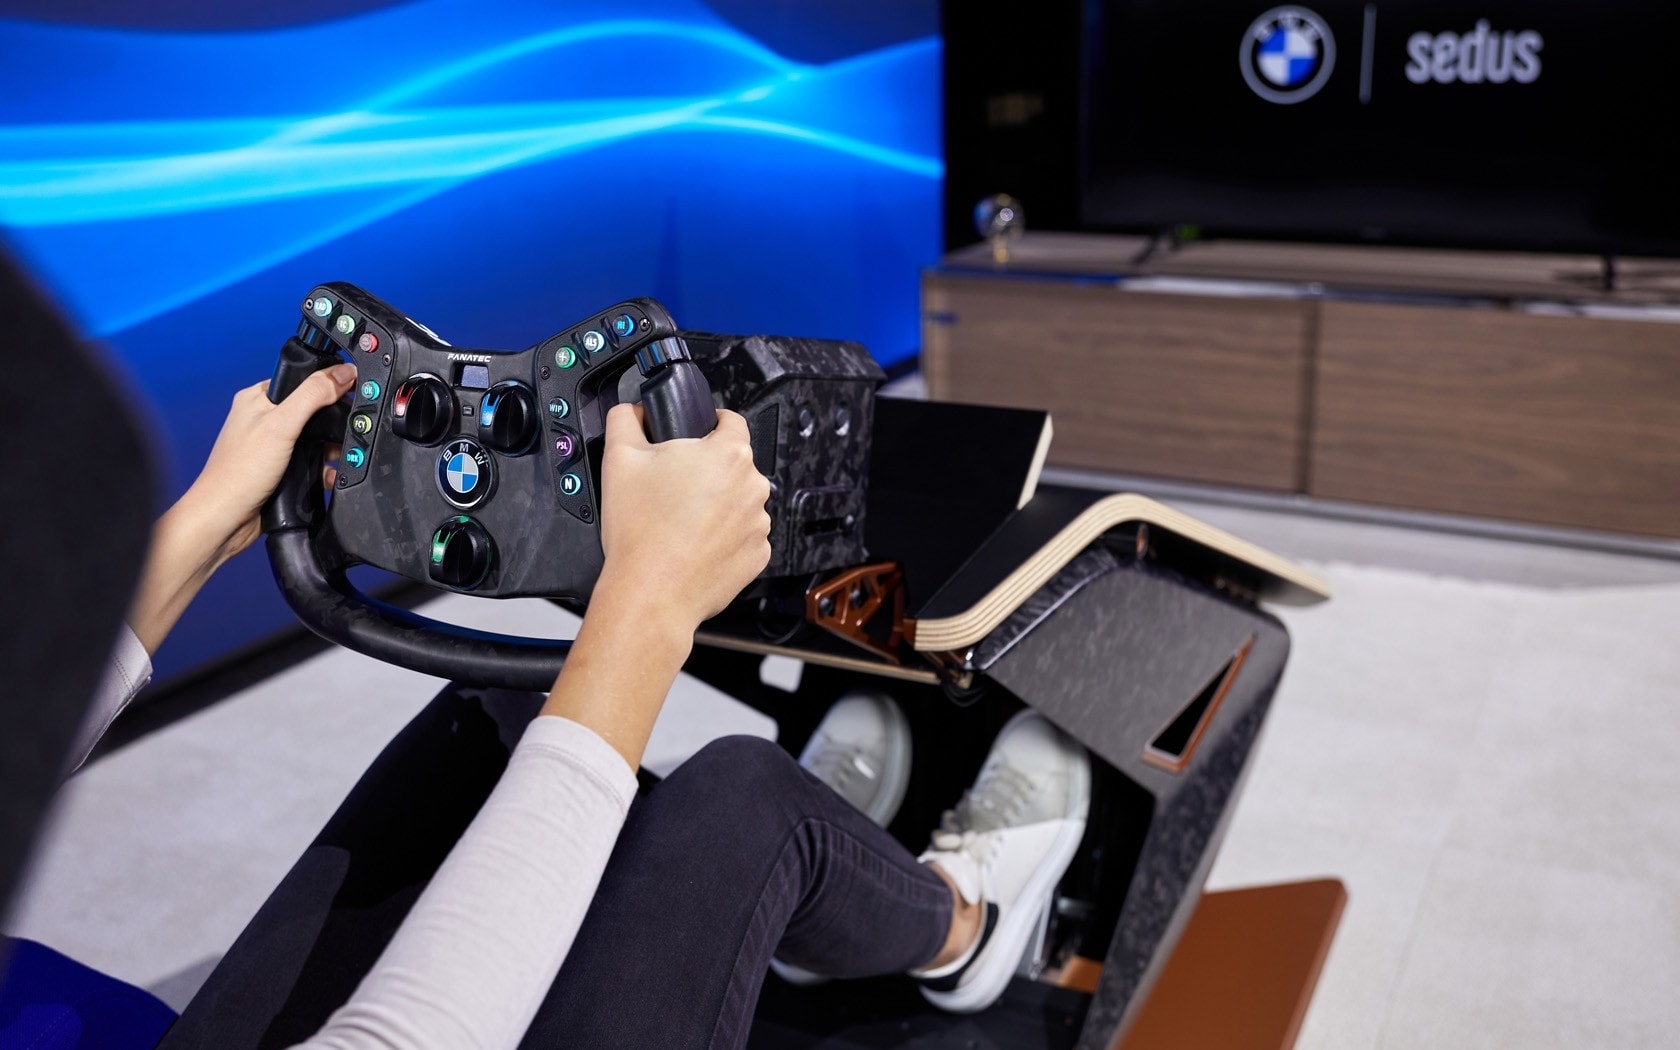 The Famous Fanatec Podium BMW M4 GT3 Sim Racing Wheel Sells Out